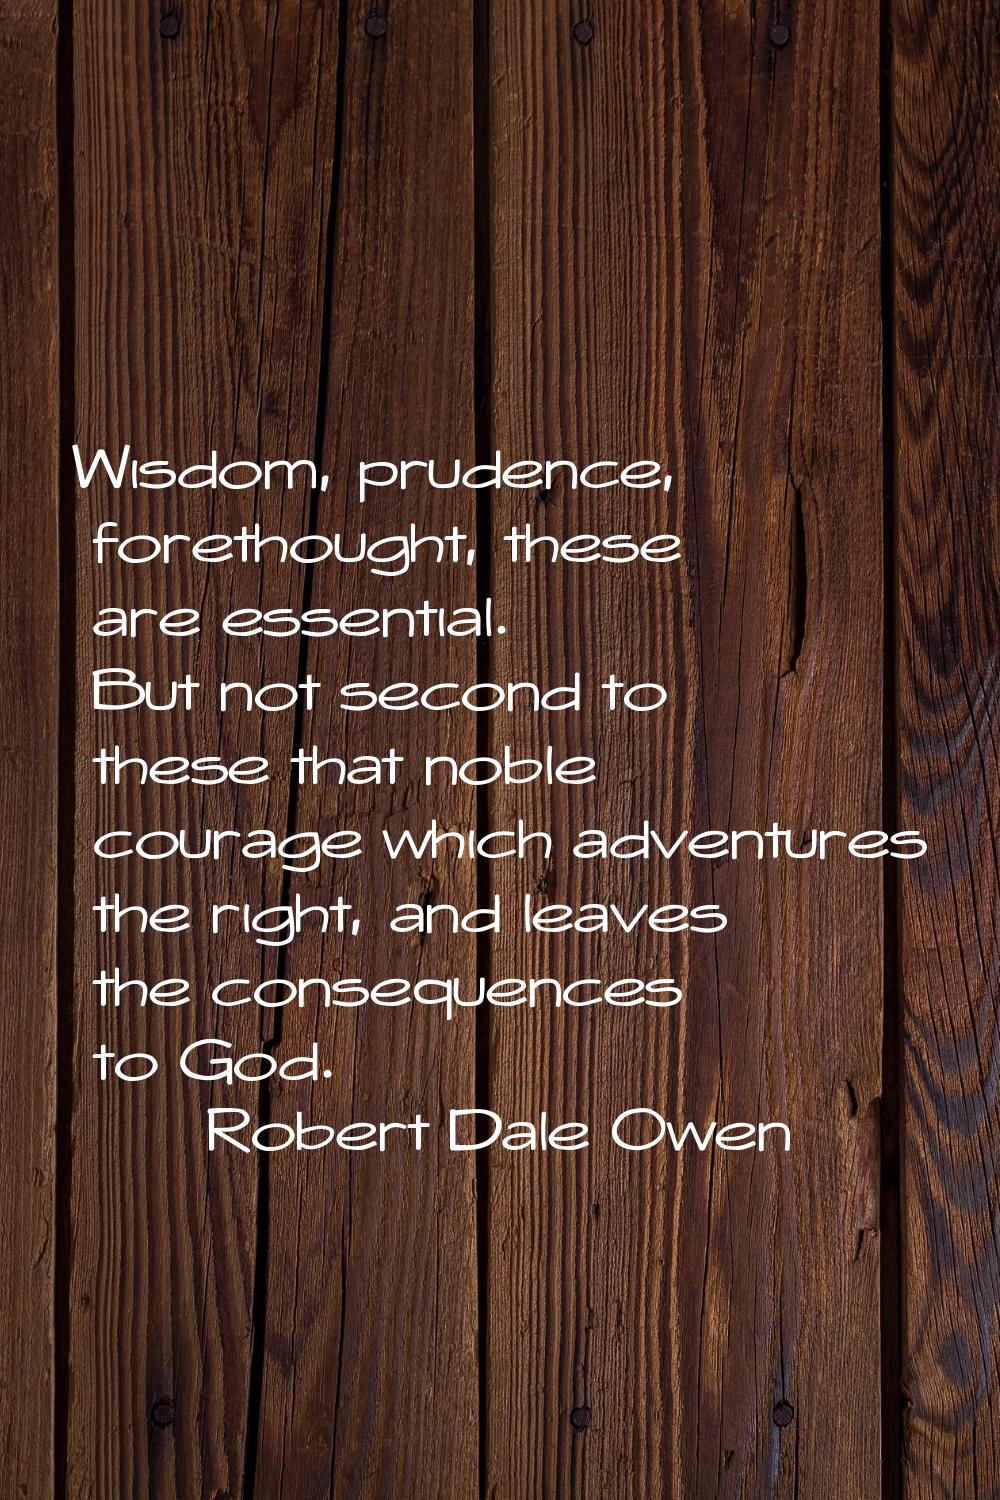 Wisdom, prudence, forethought, these are essential. But not second to these that noble courage whic